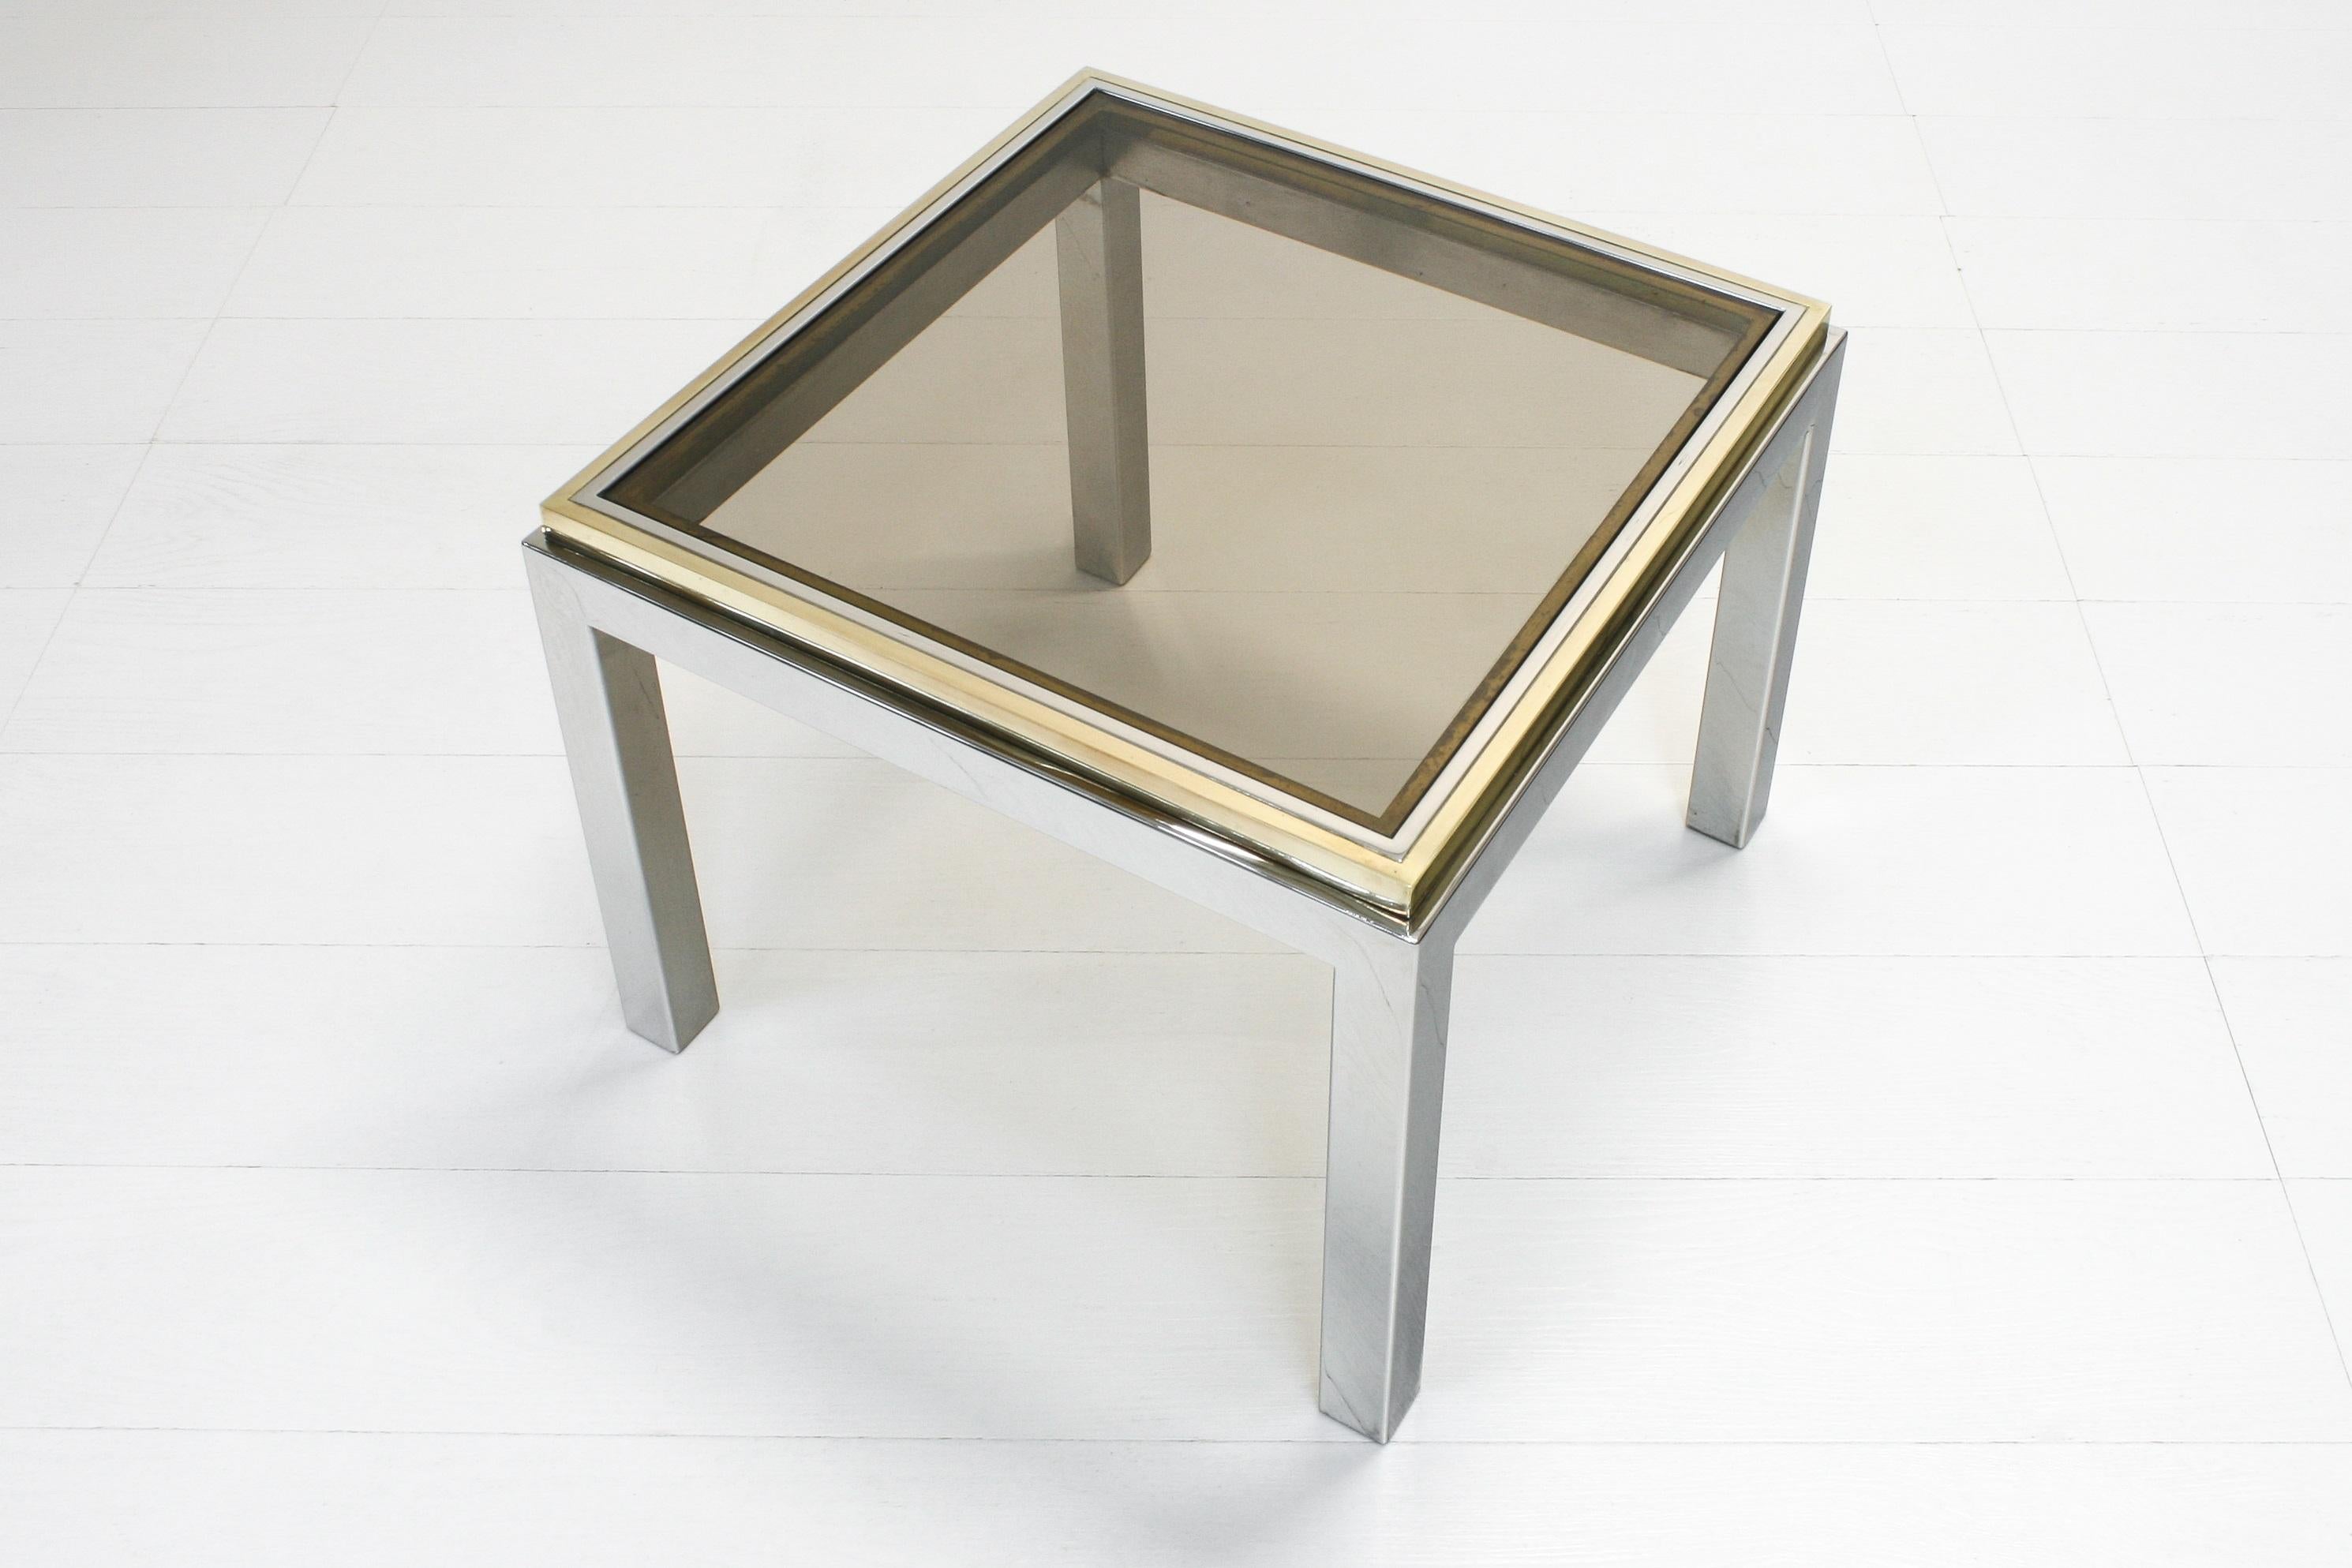 1970s Hollywood Regency Flaminia Smoked Glass Coffee & Side Table by Willy Rizzo For Sale 4